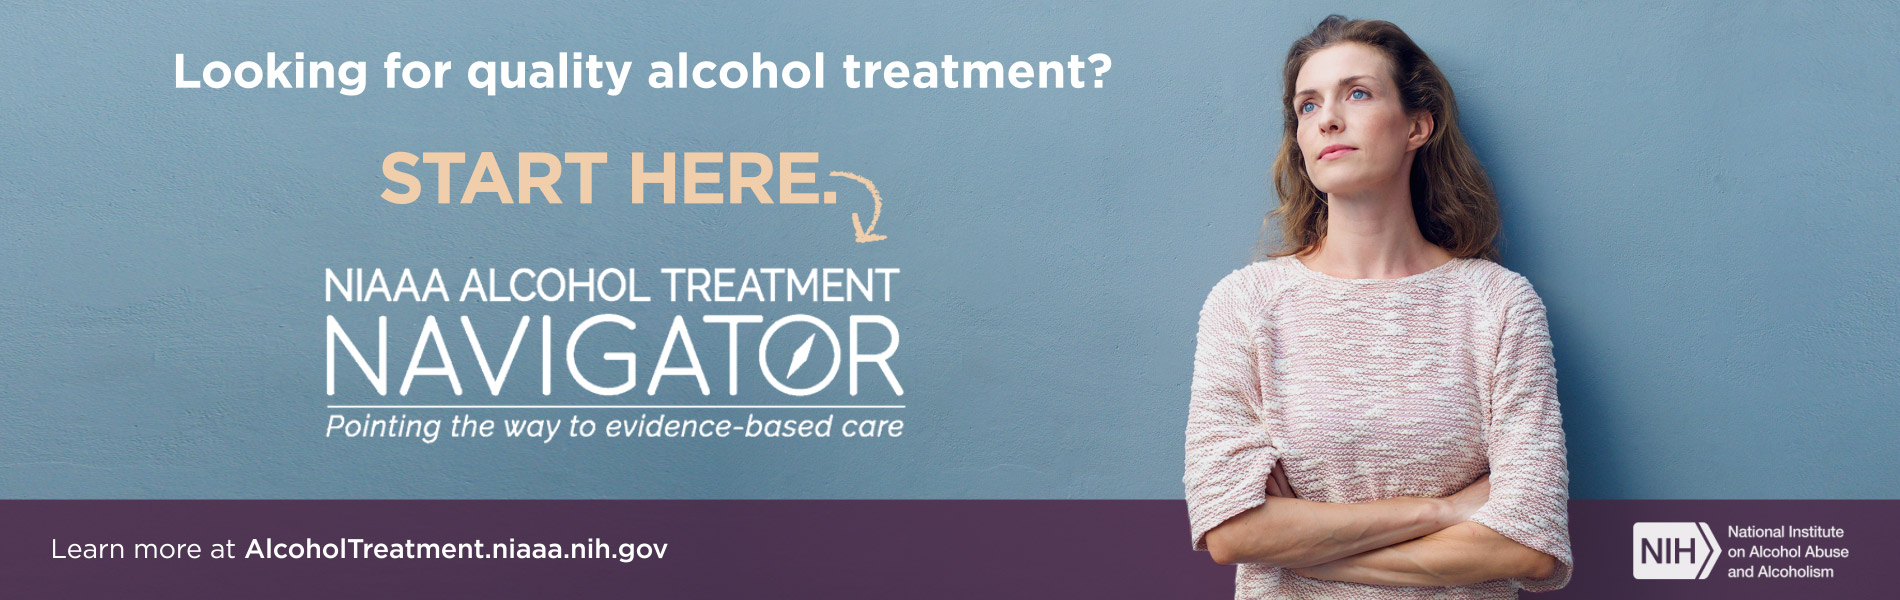 Alcohol Treatment Navigator Pointing the way to evidence based care